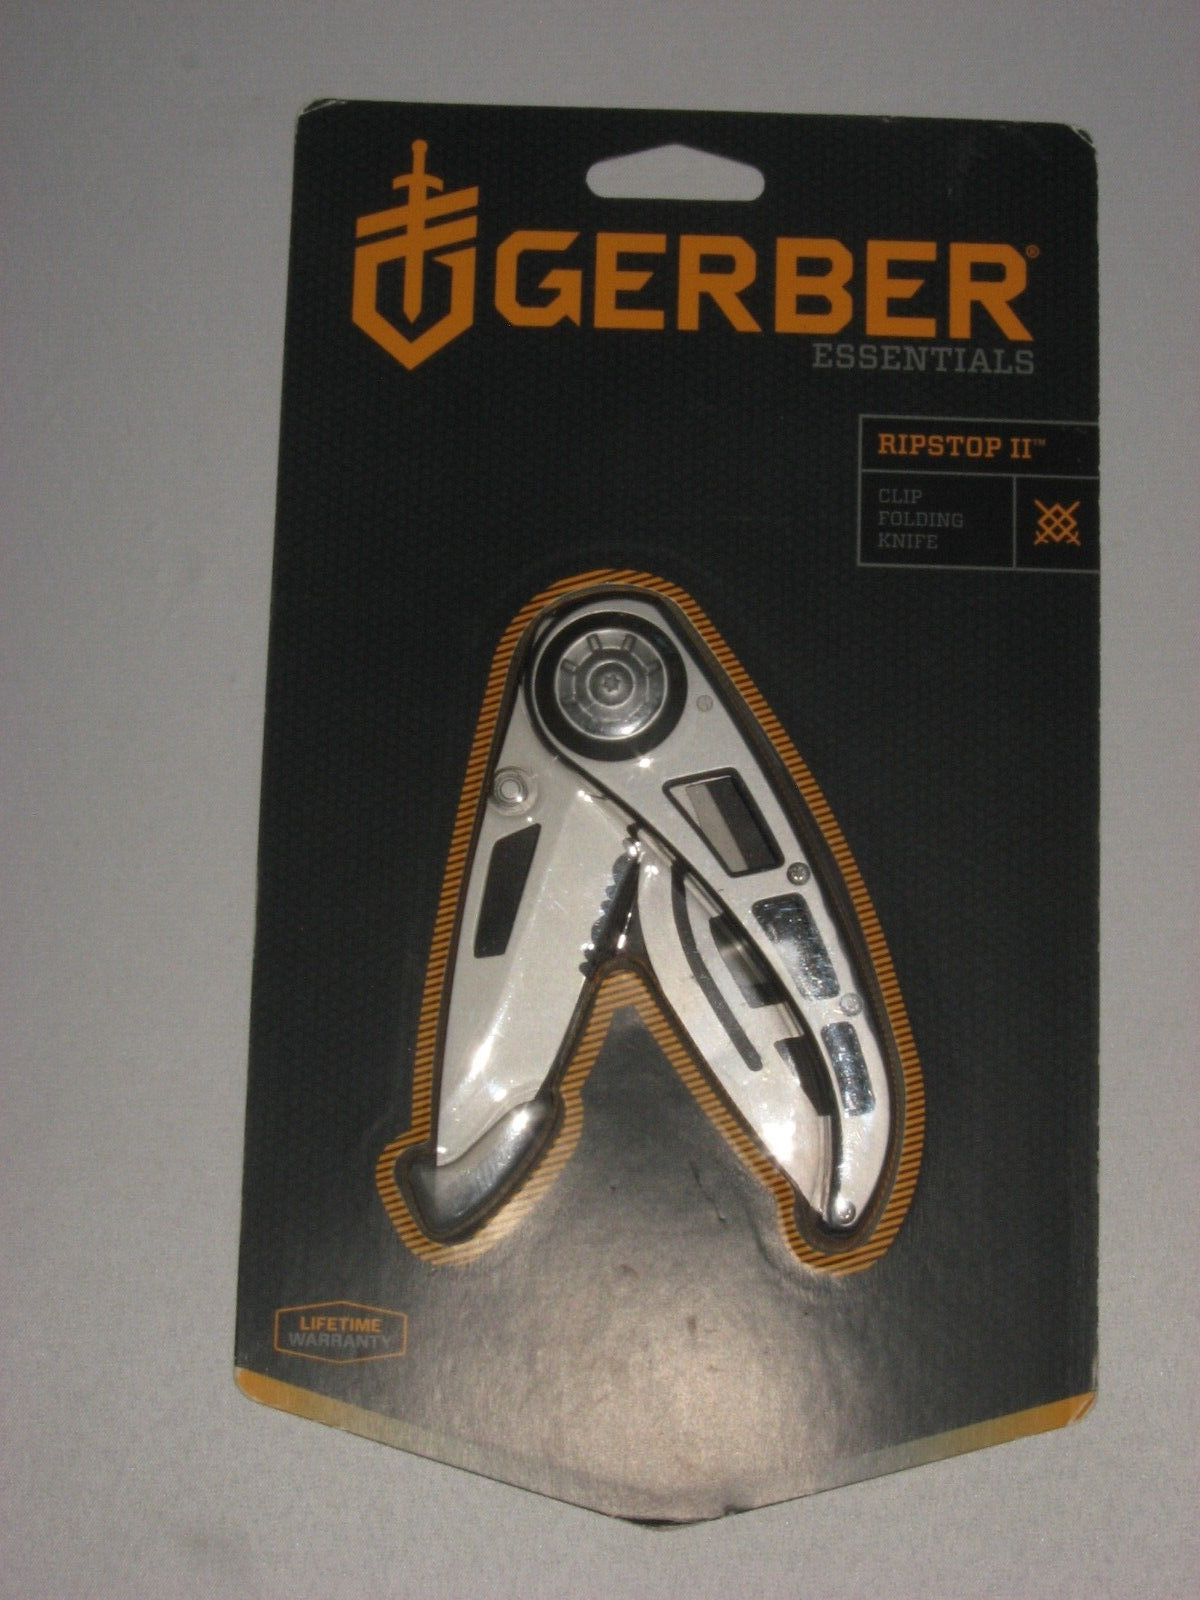 Gerber Essentials Ripstop 2 Clip Folding Knife New in Package